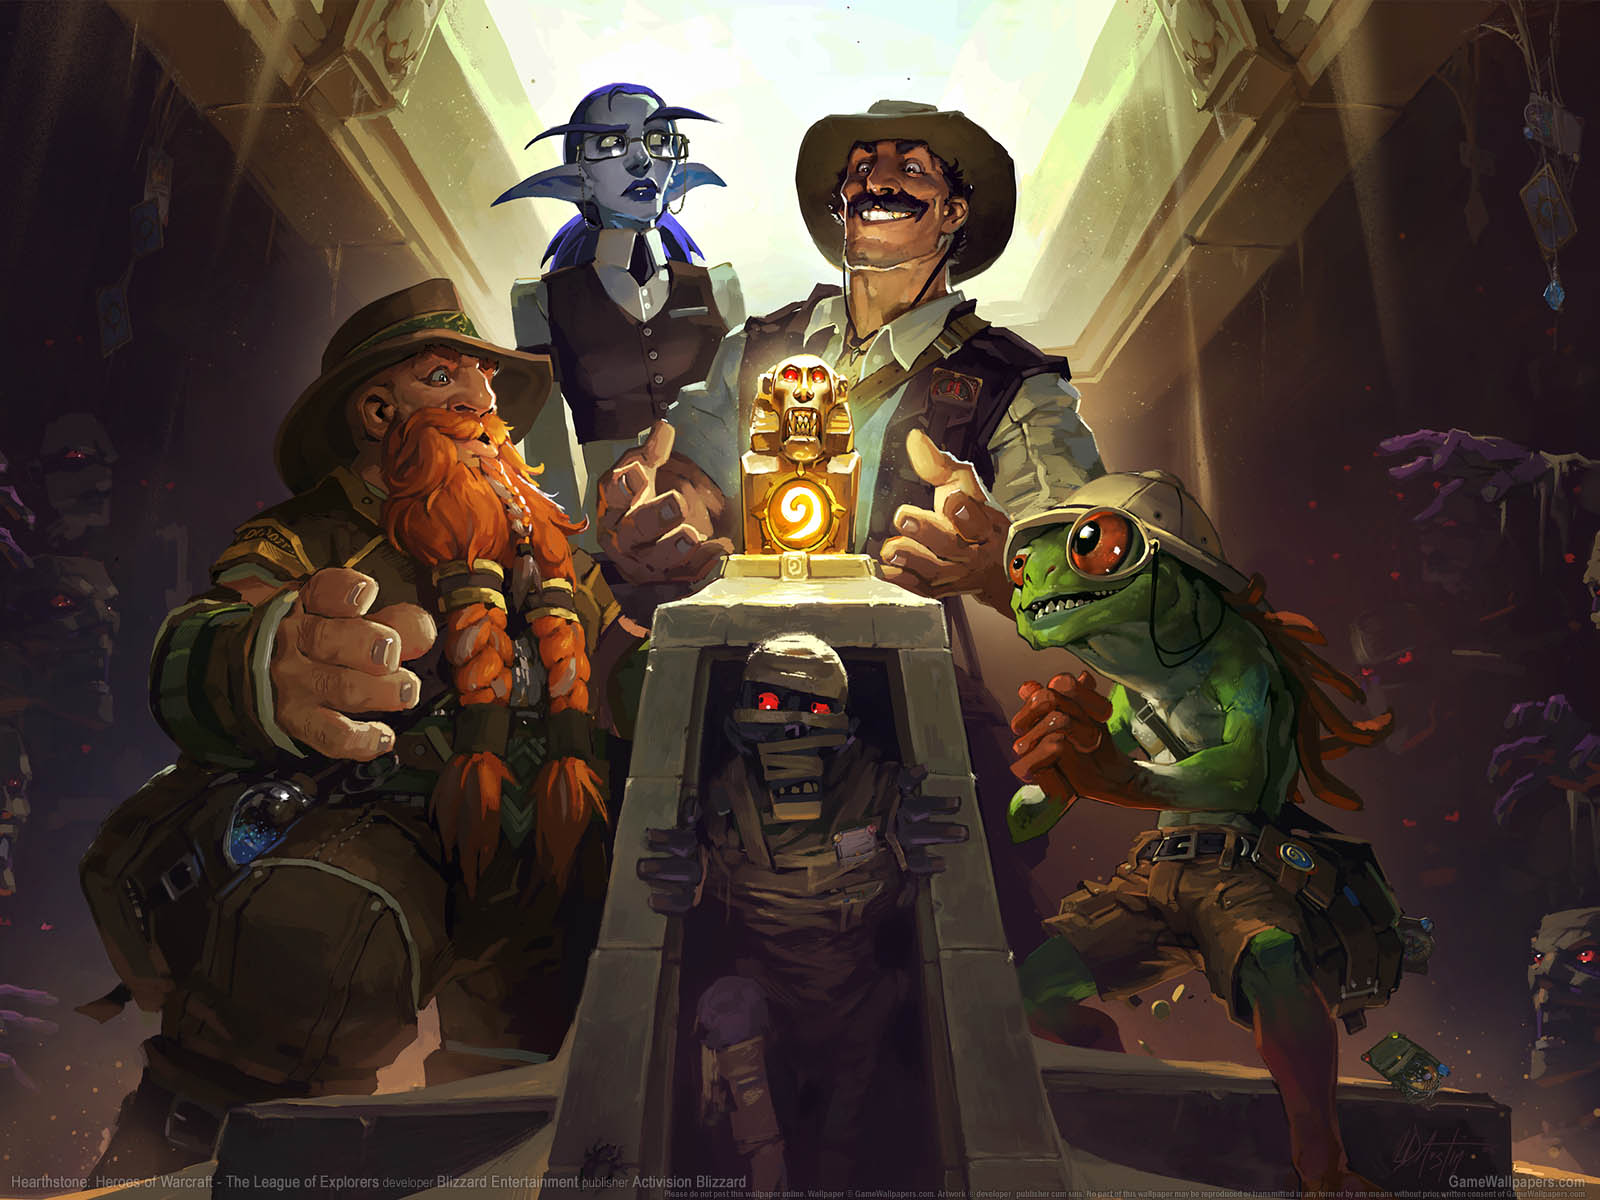 Hearthstone%25253A Heroes of Warcraft - The League of Explorers wallpaper 01 1600x1200